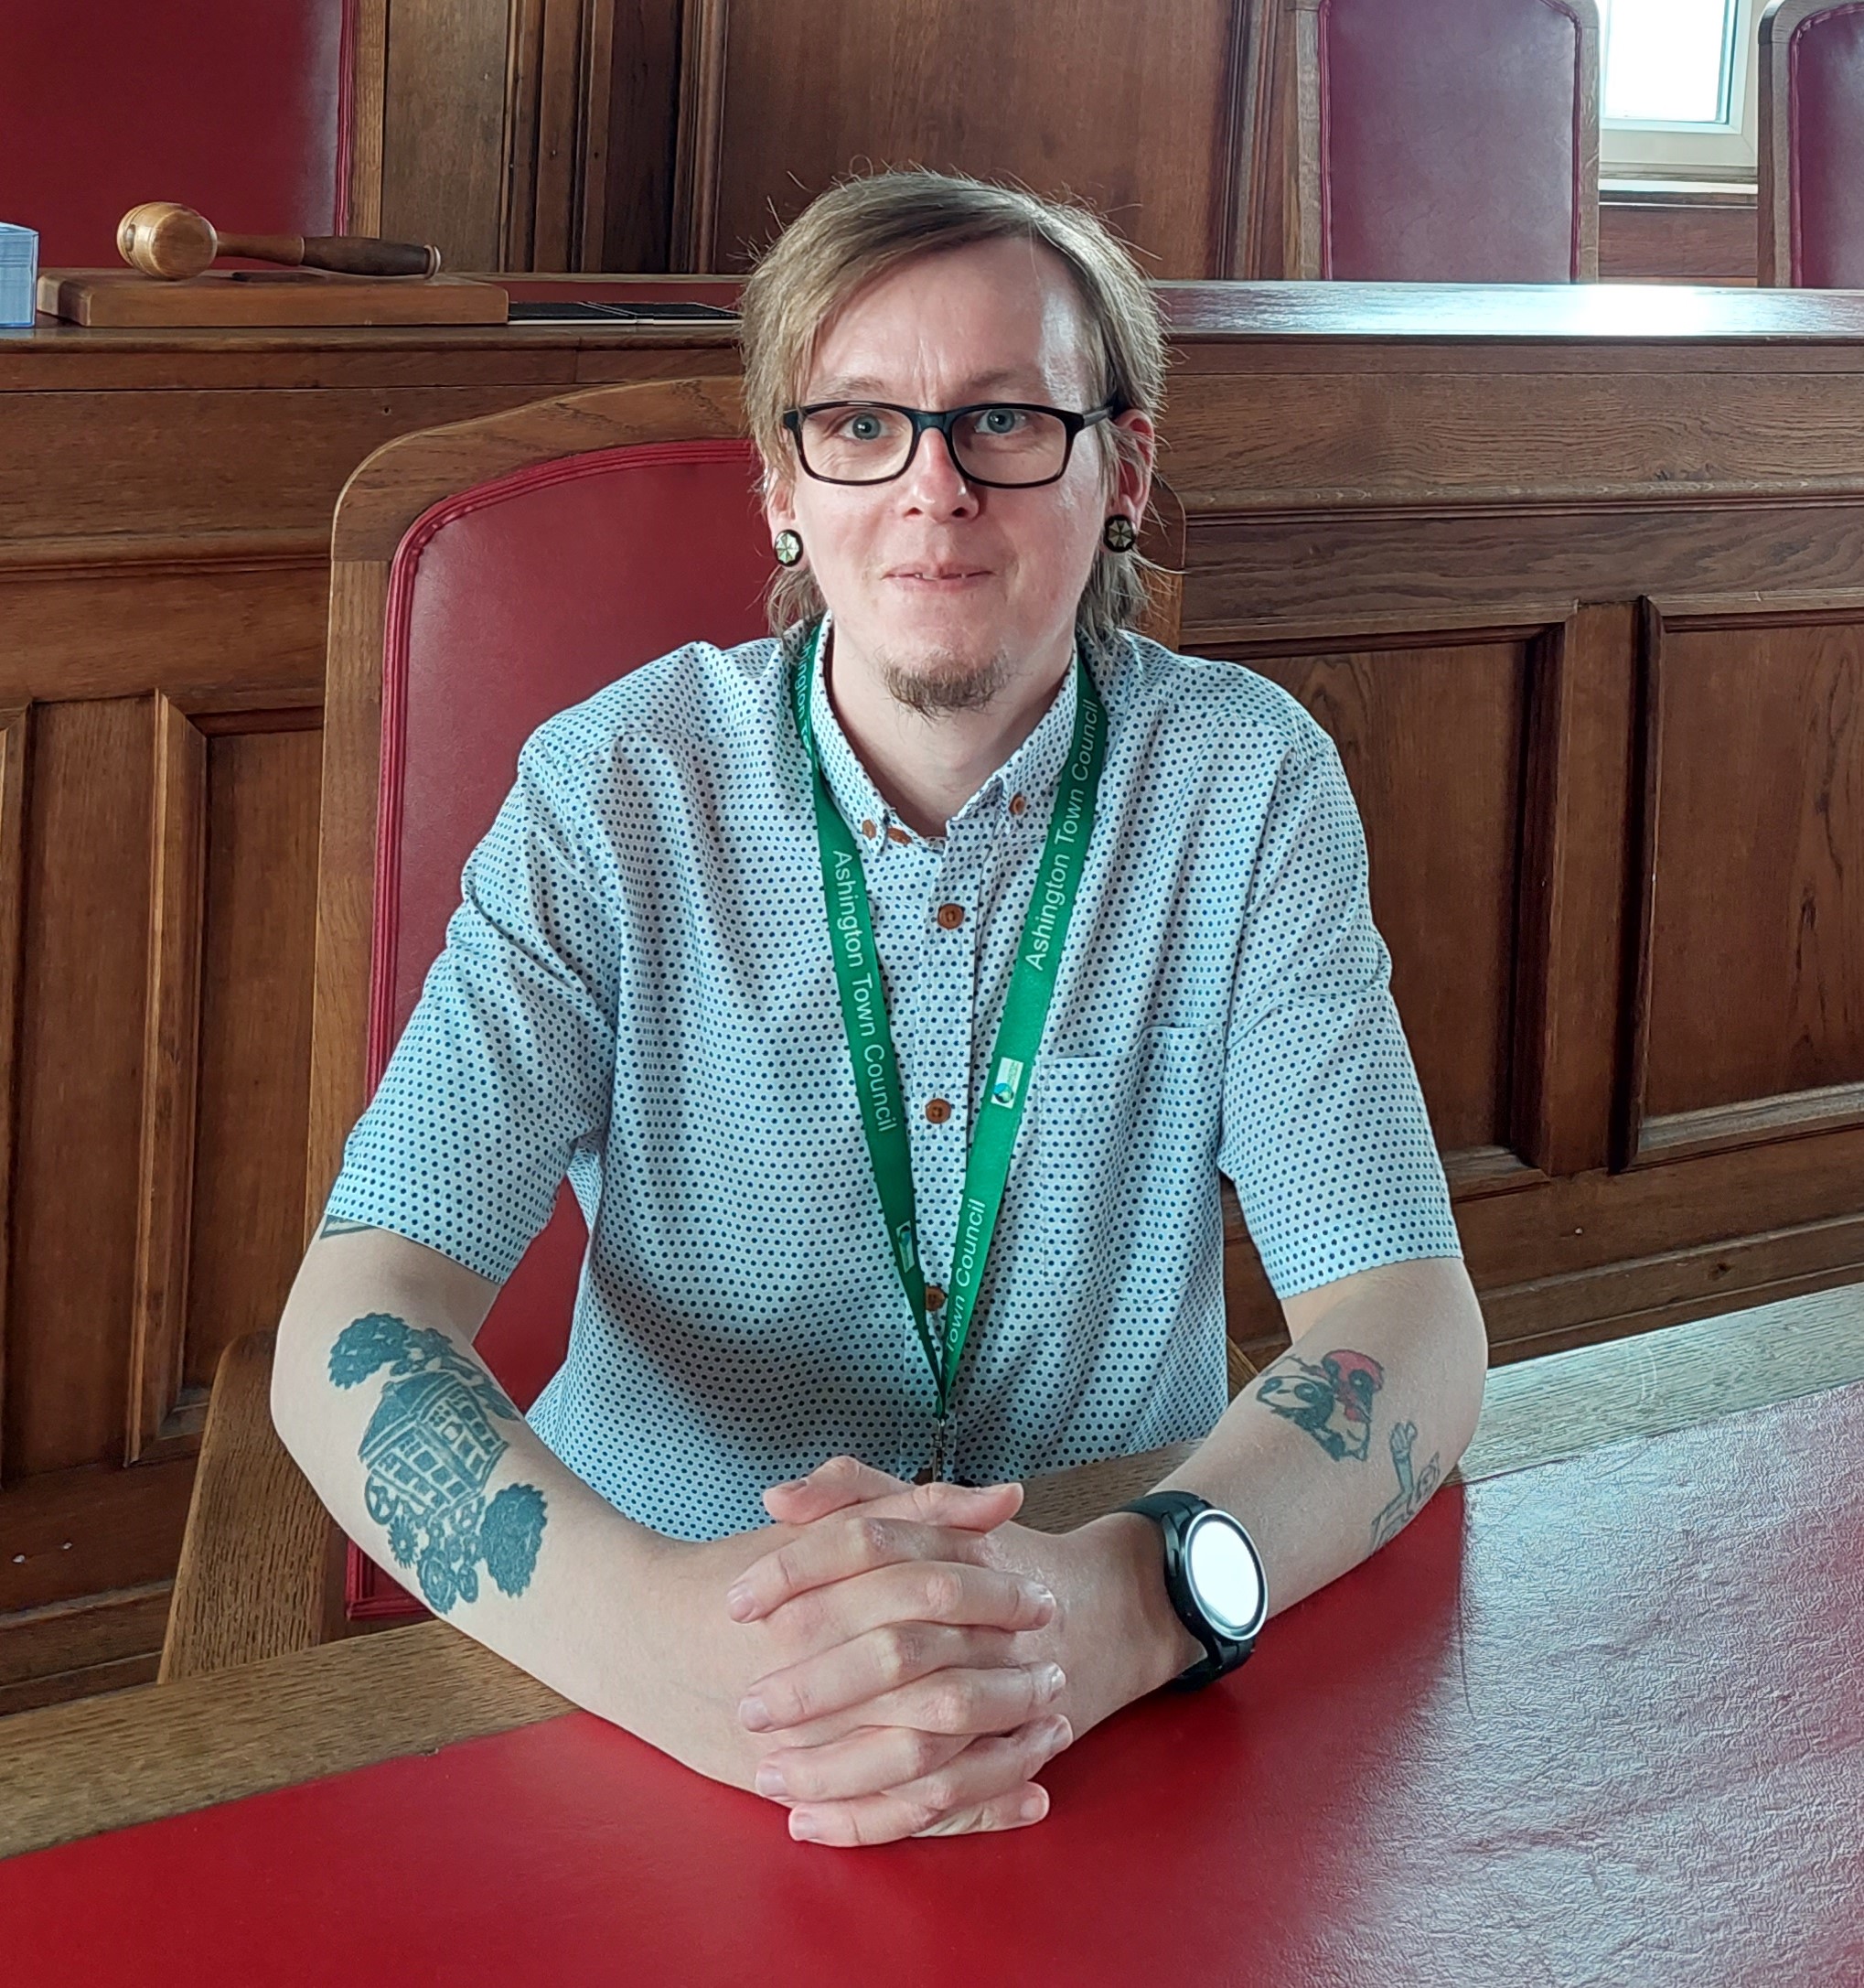 Ashington Town Council Welcomes New Officer